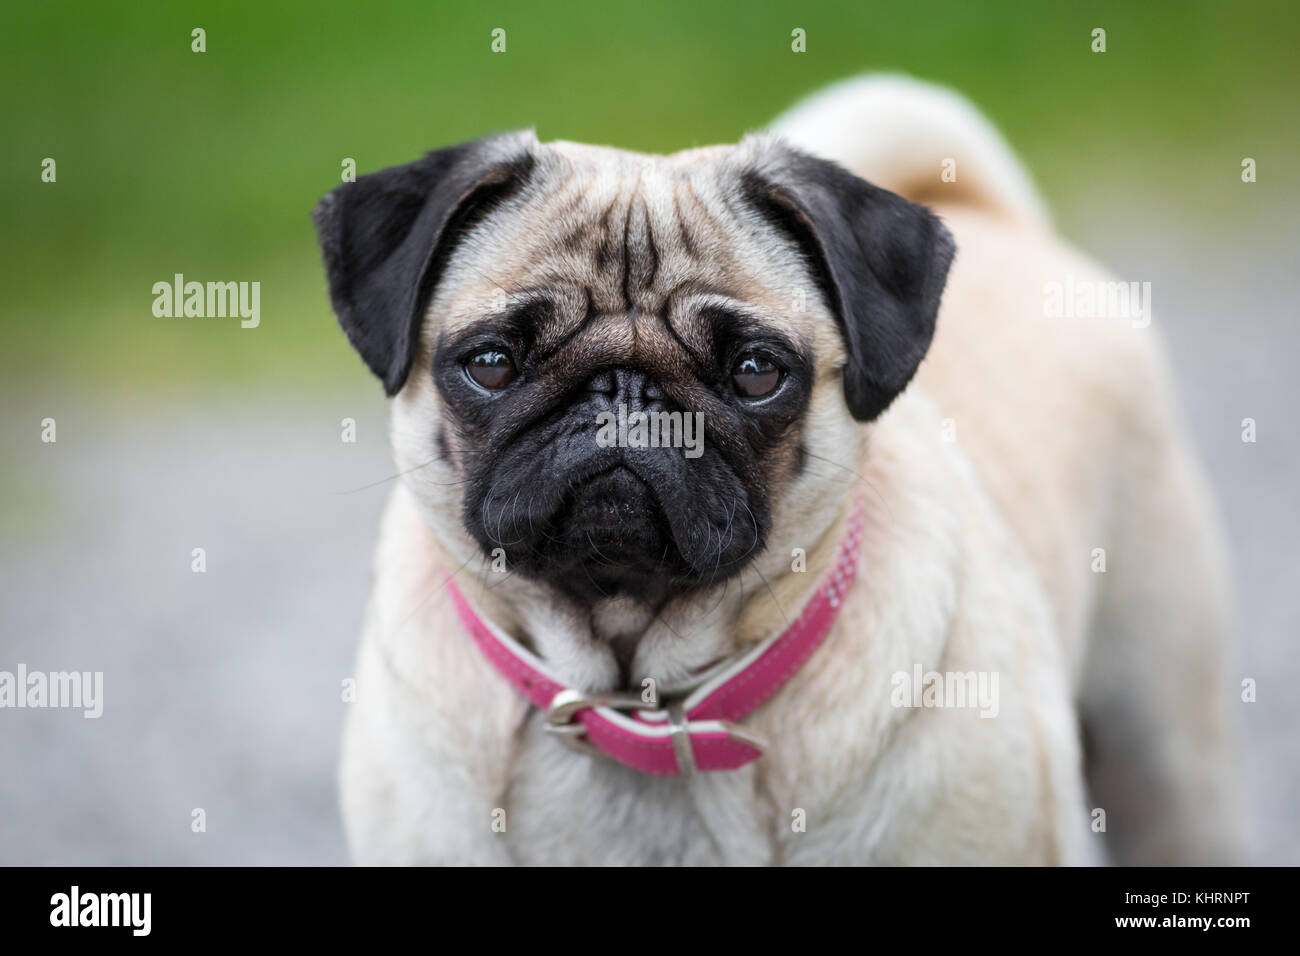 A pug with a pink collar looks directly into the camera. Stock Photo